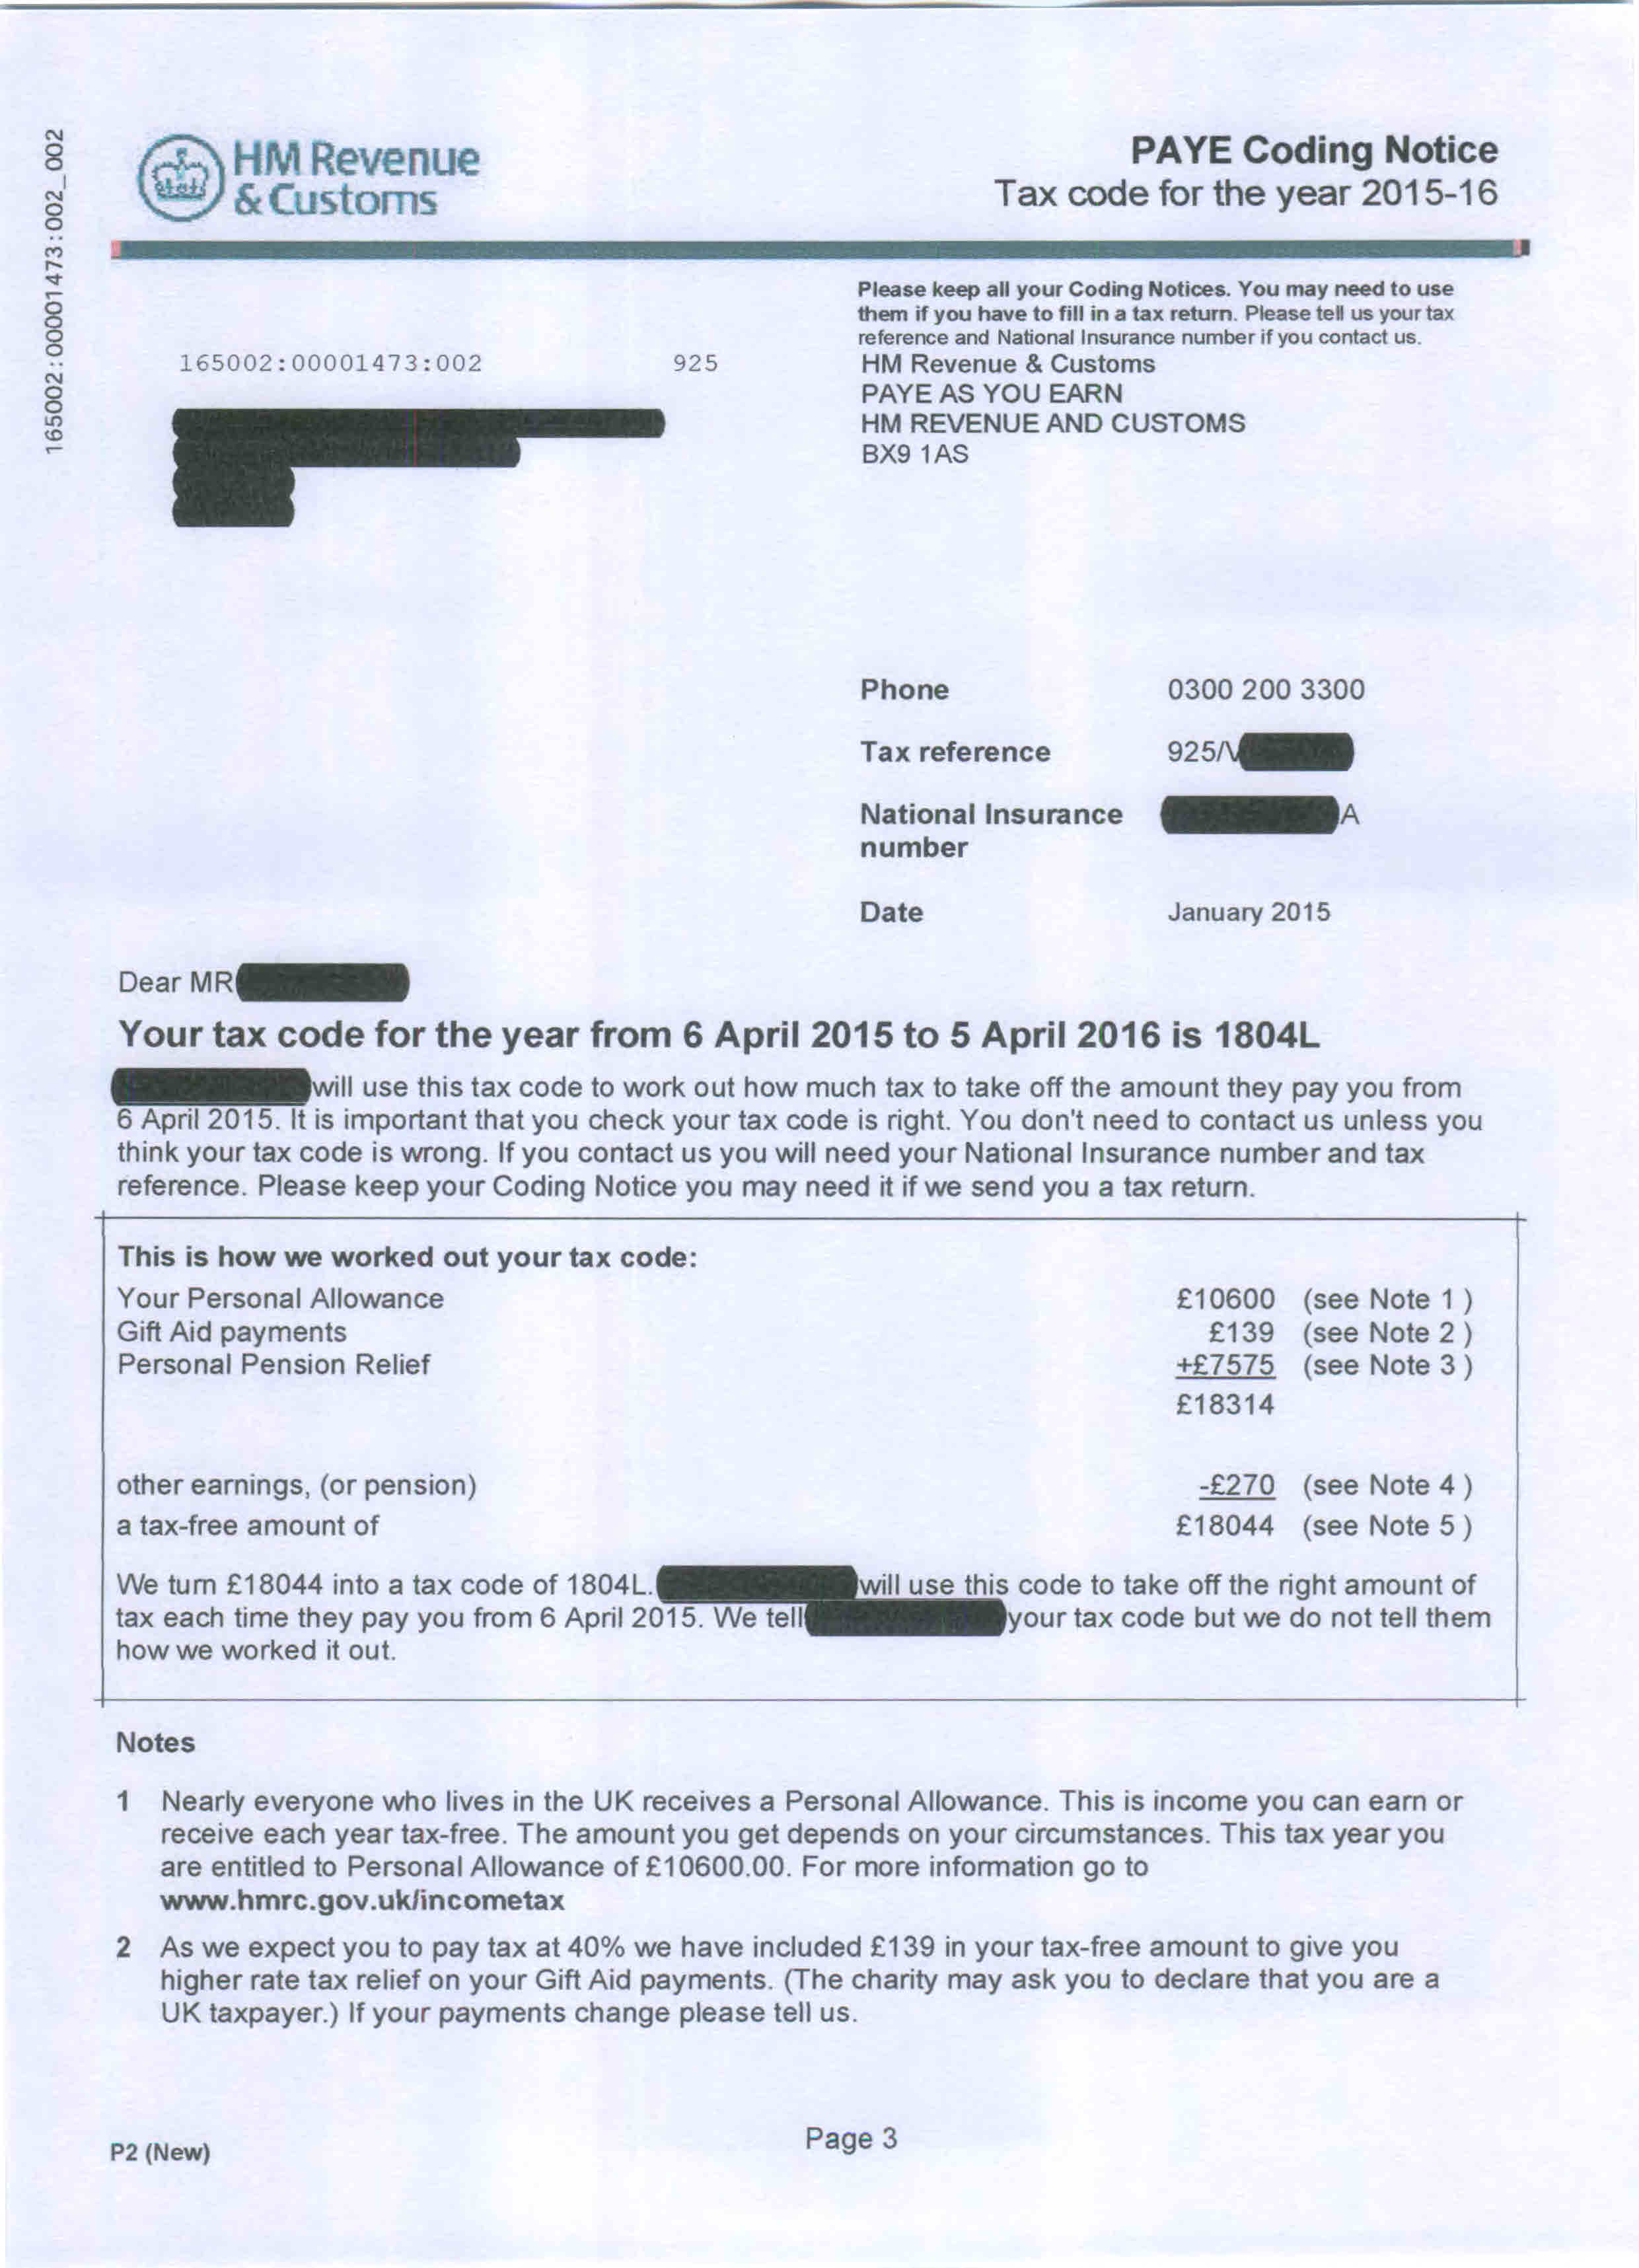 examples-of-hmrc-related-phishing-emails-and-bogus-contact-gov-uk